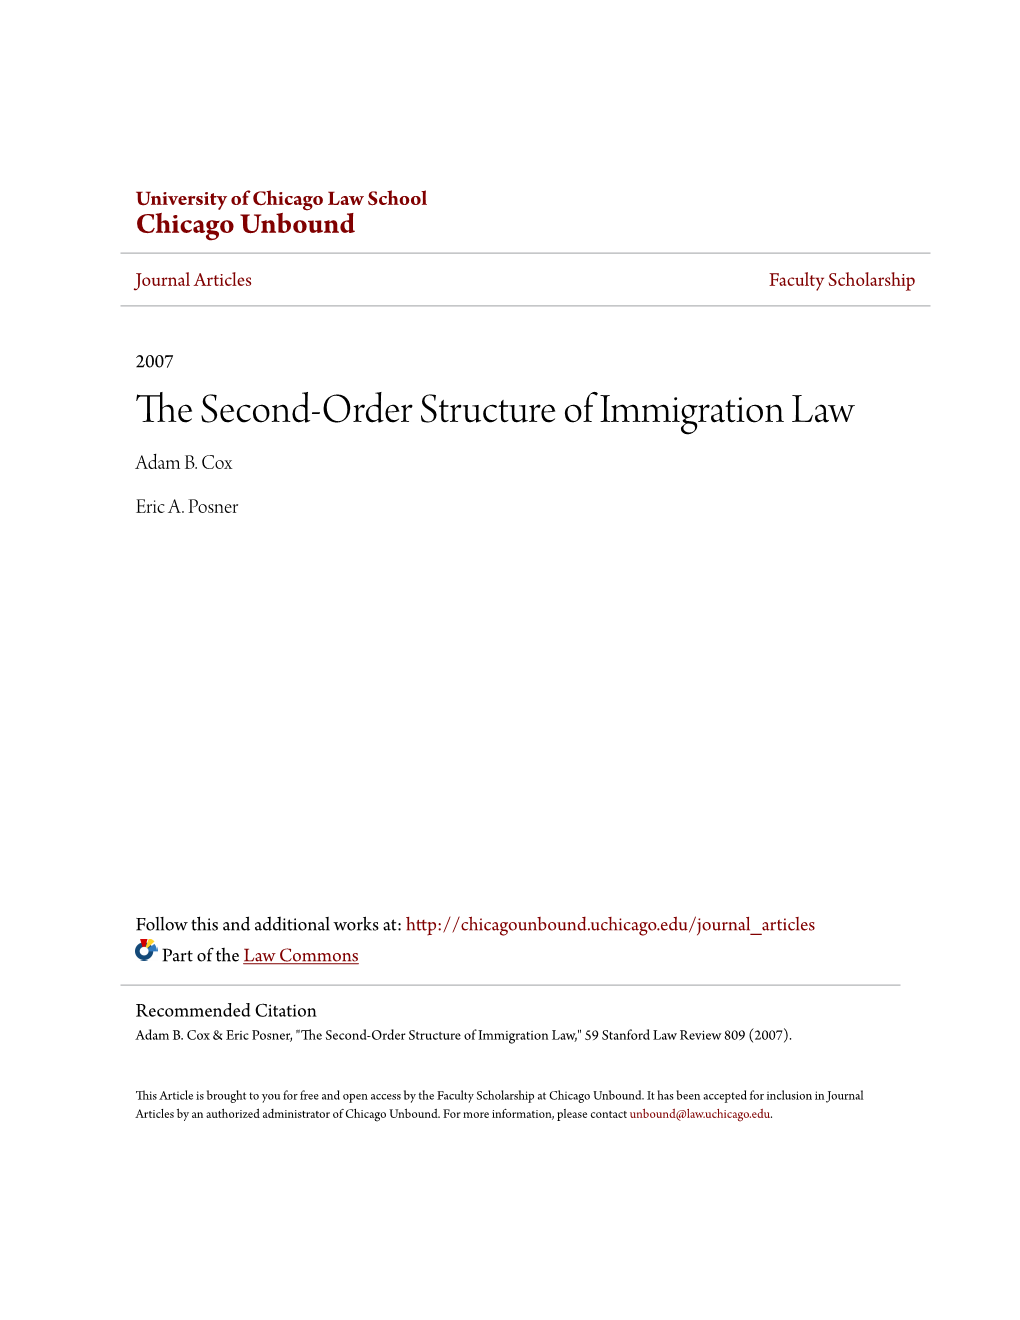 The Second-Order Structure of Immigration Law